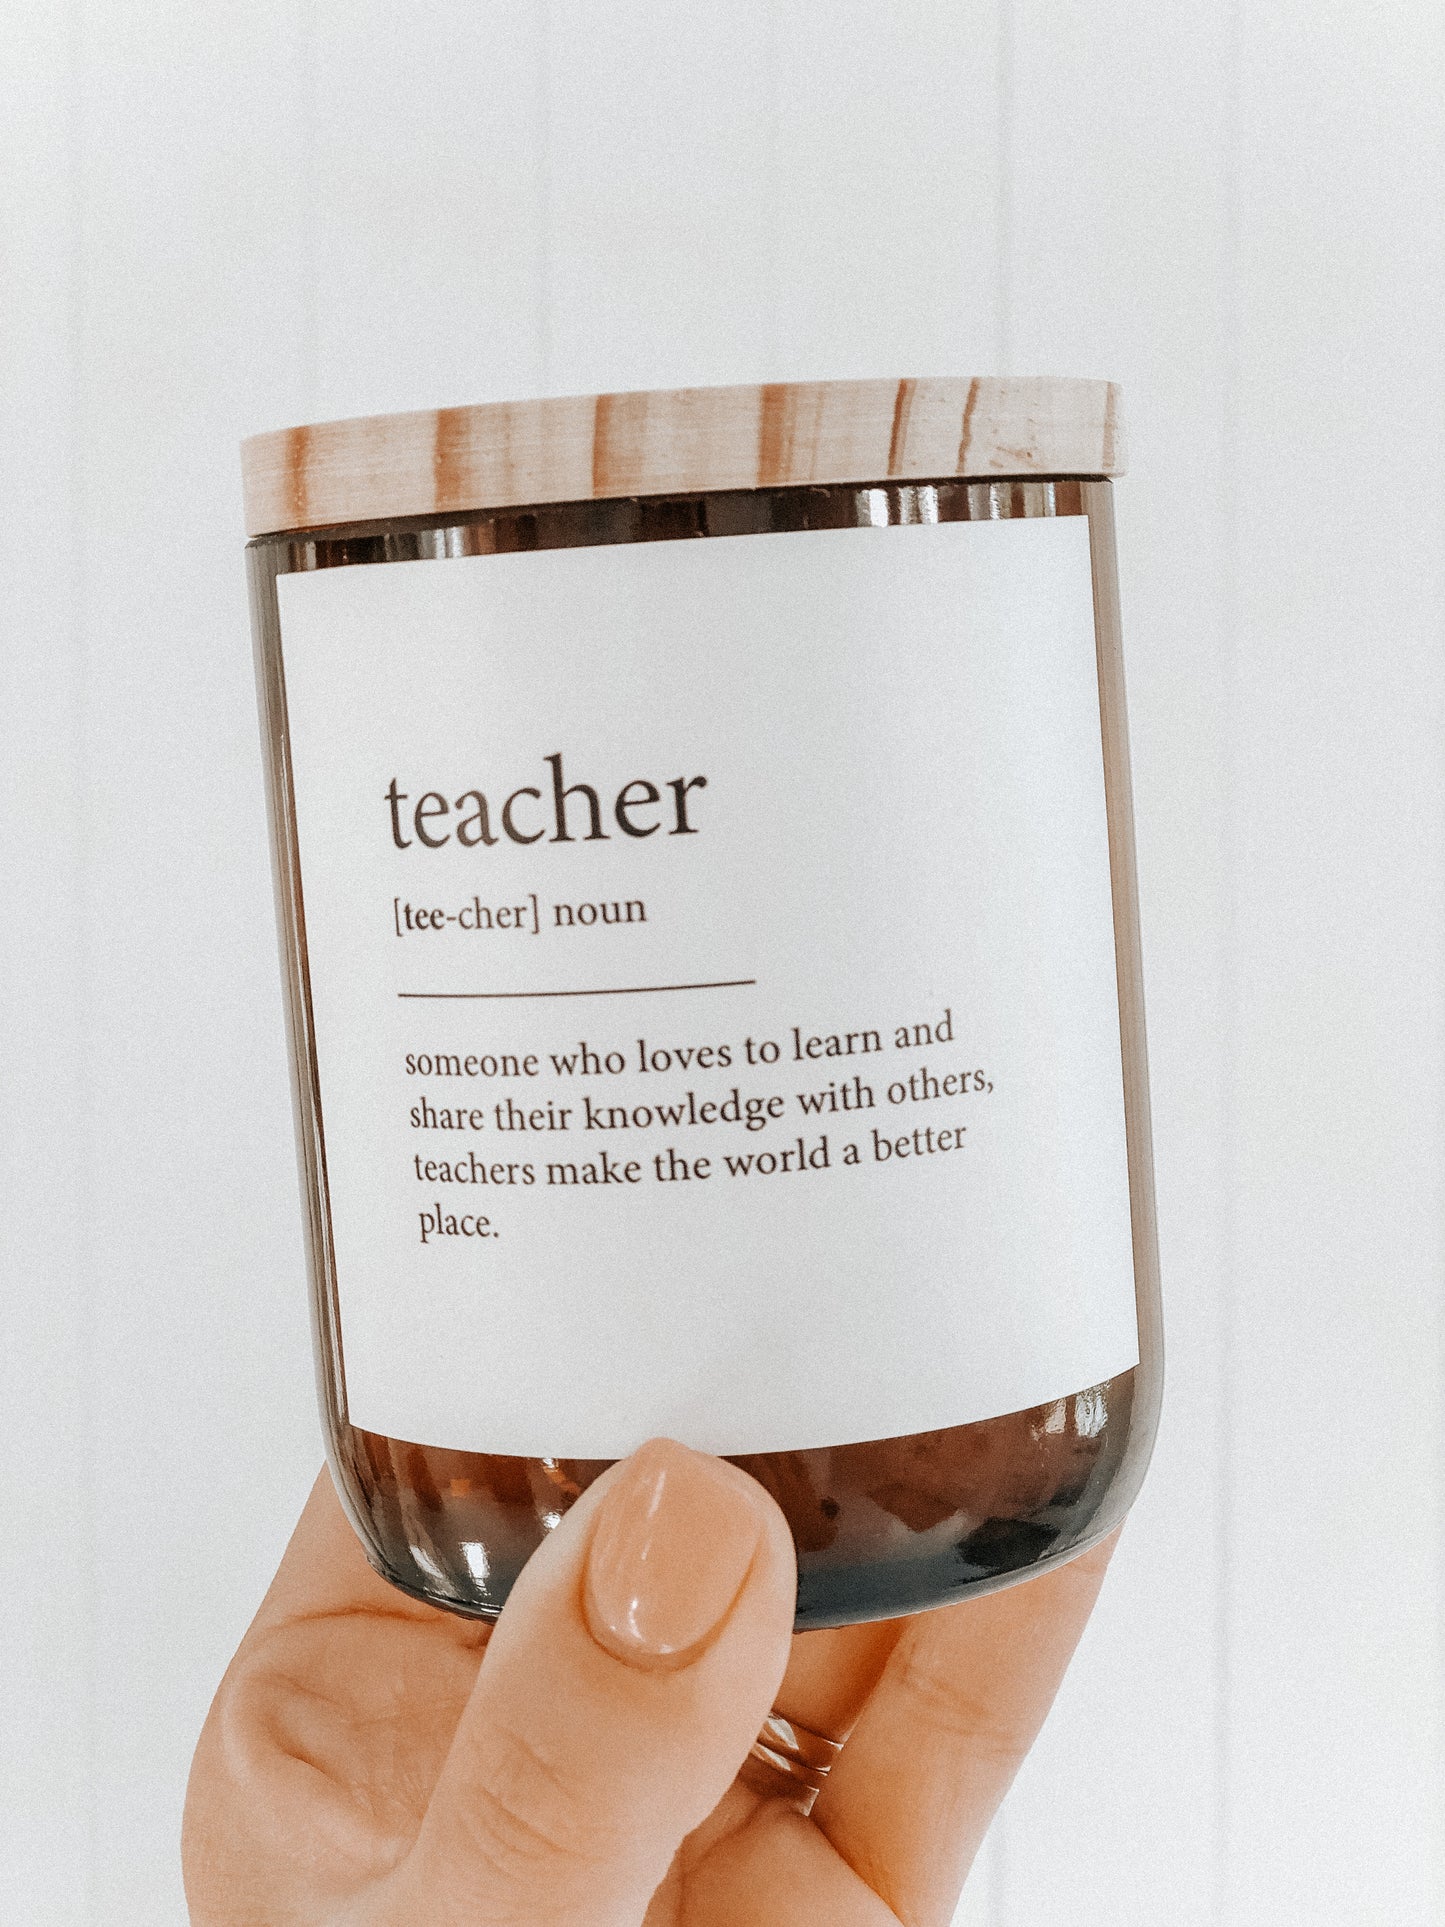 Dictionary Meaning Candle - teacher